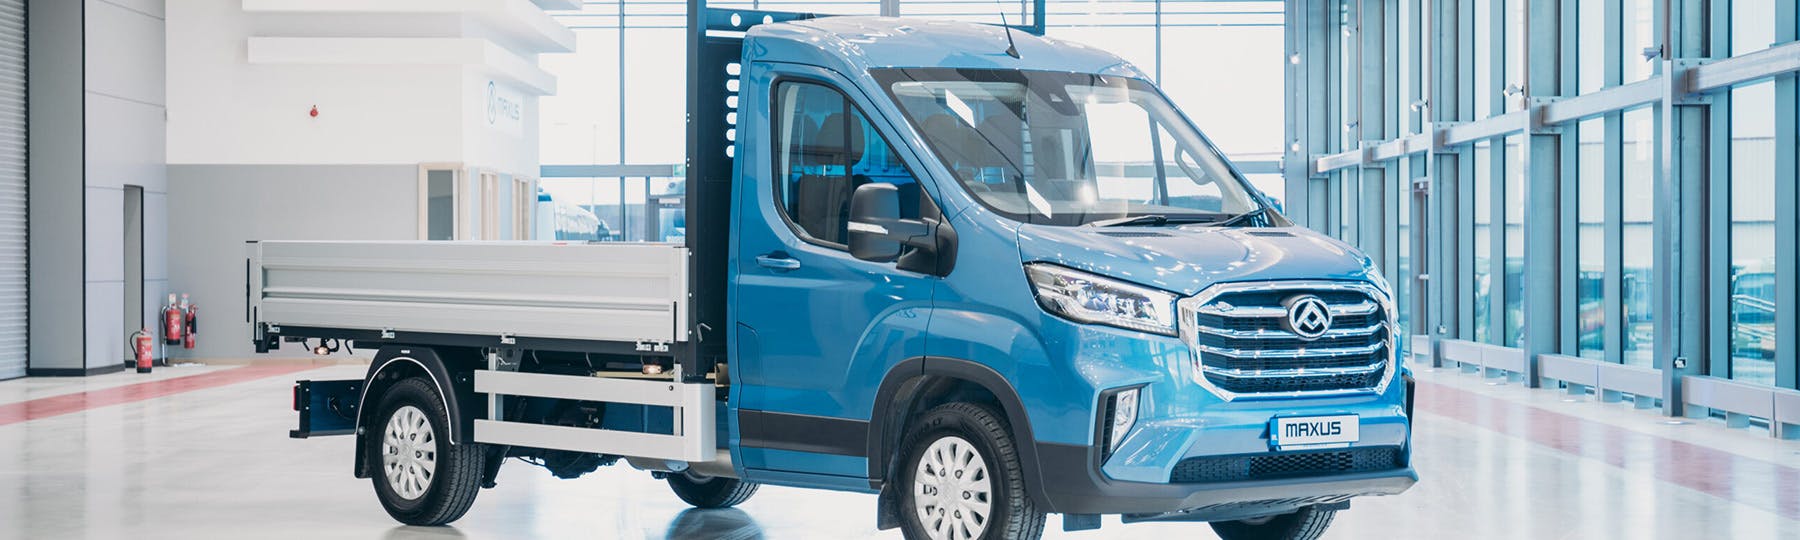 Maxus eDeliver 9 Chassis Cab